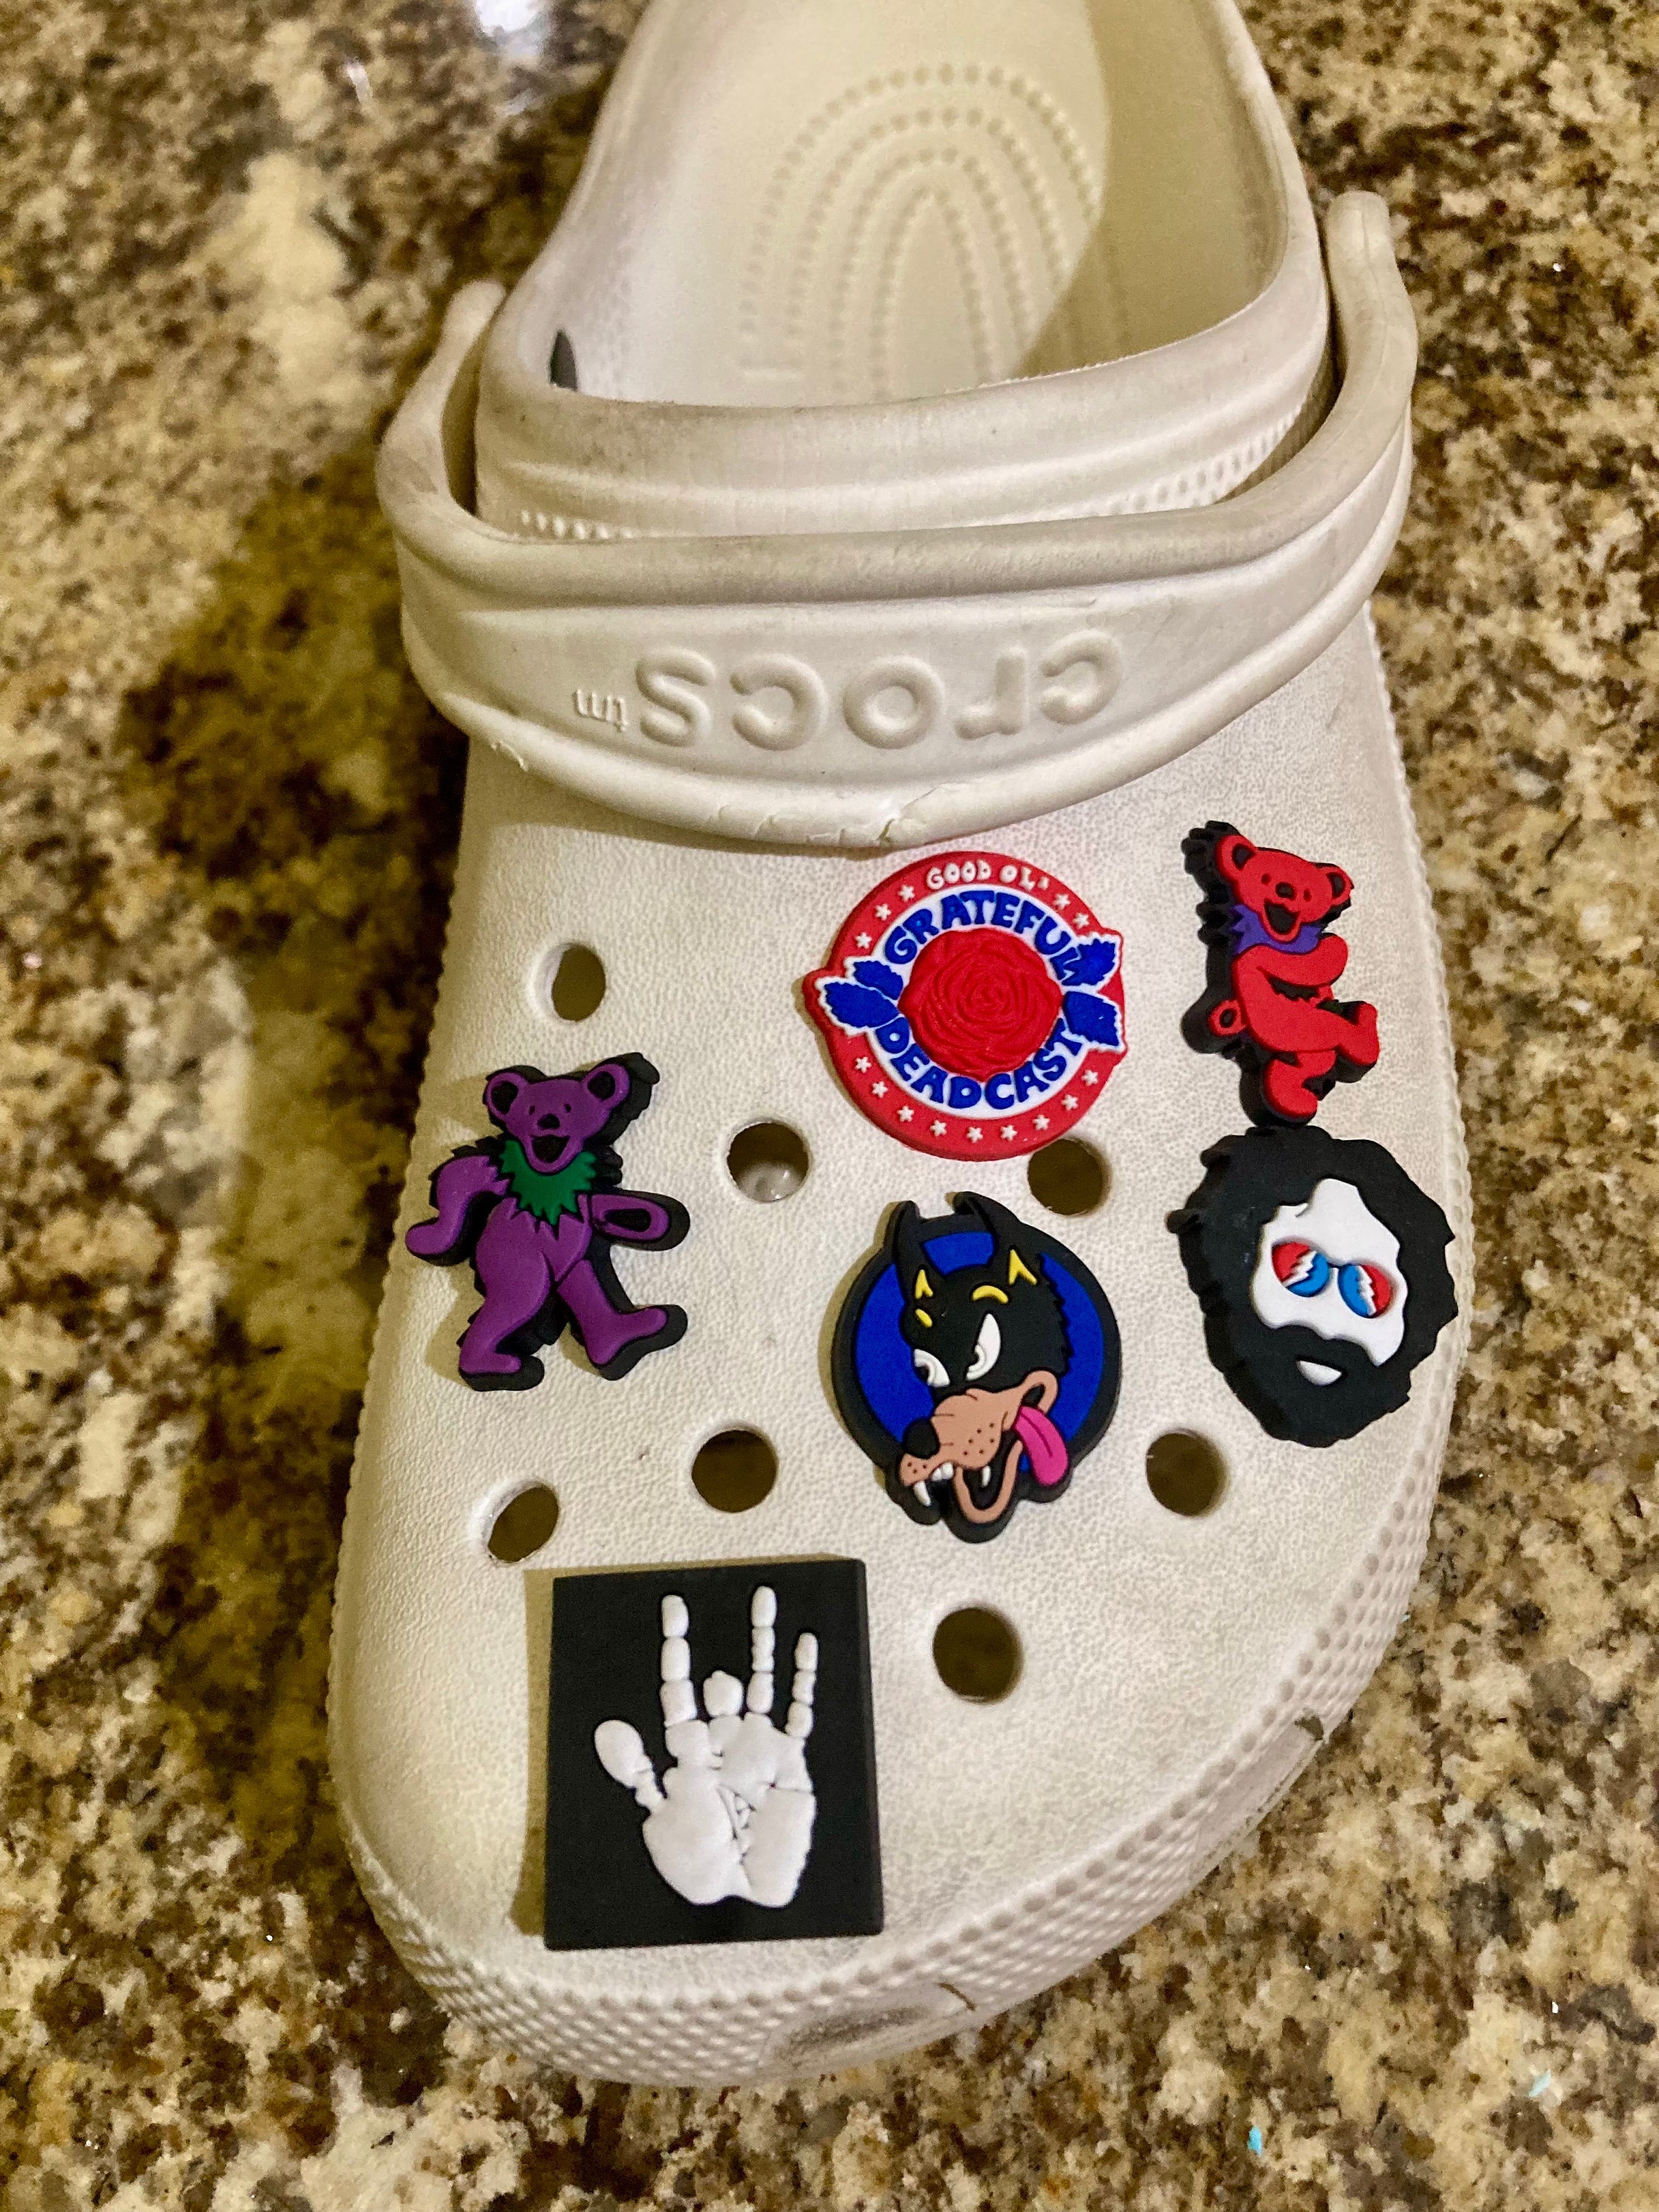 Snoopy Inspired Crocs Charms. Charlie Brown Peanut Gallery Croc